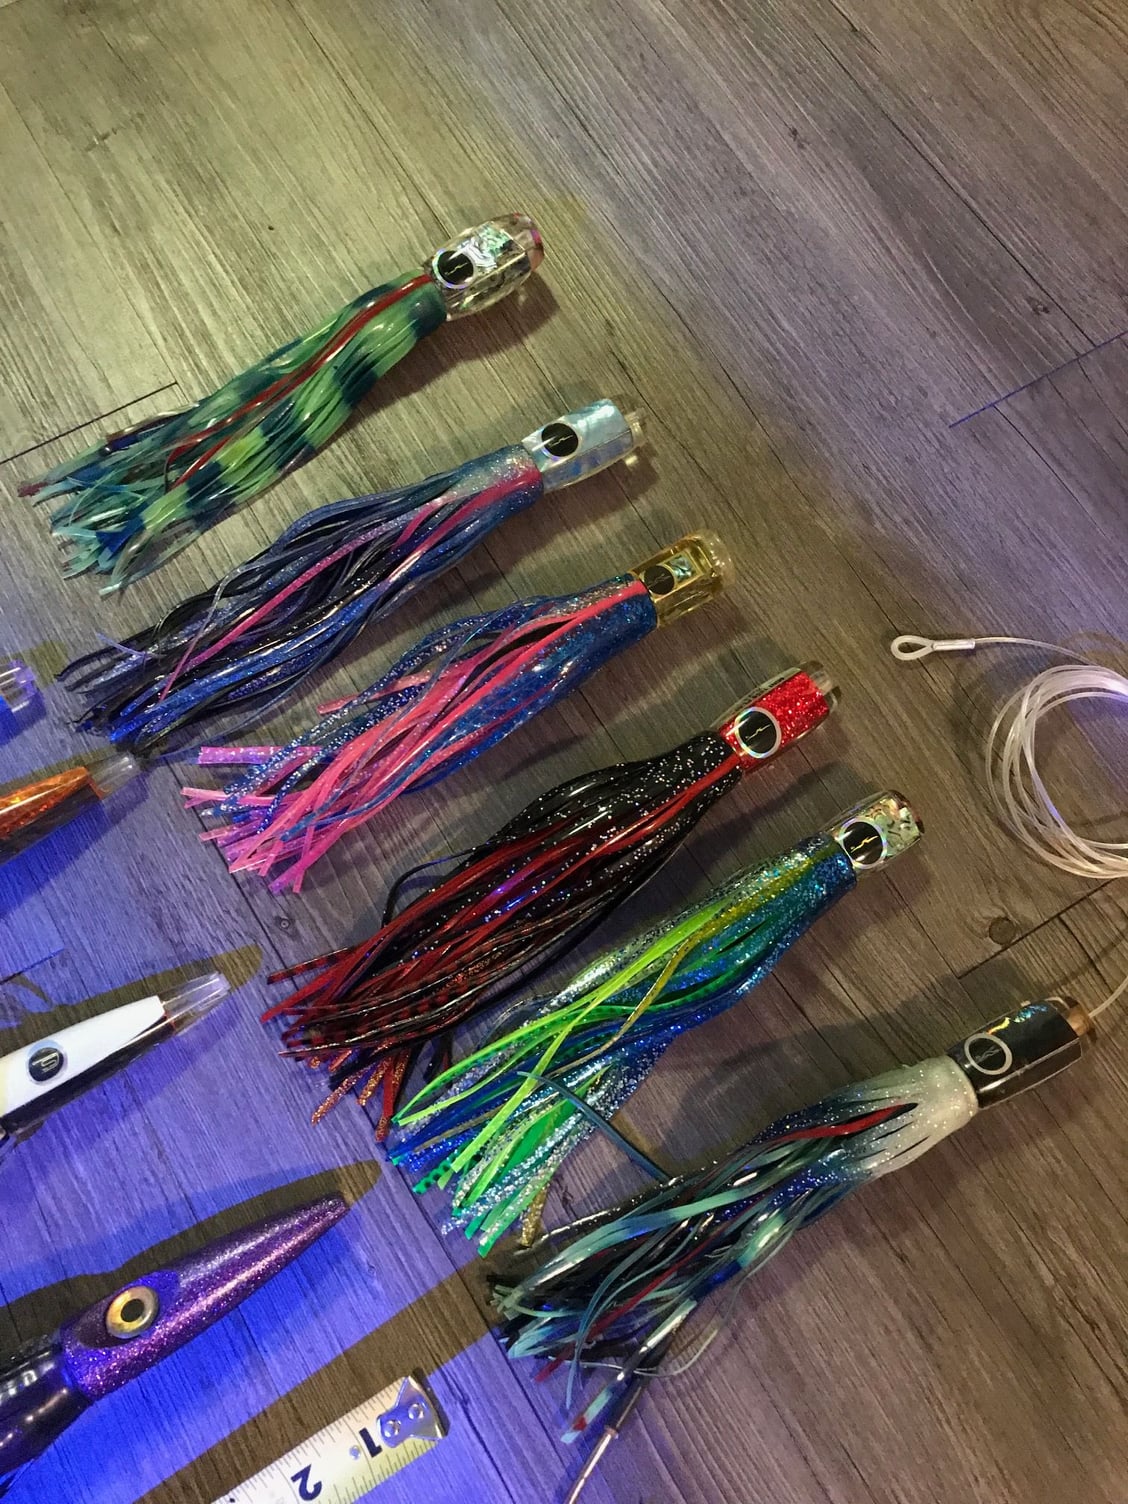 Black Bart Lures & HS wahoo lures - The Hull Truth - Boating and